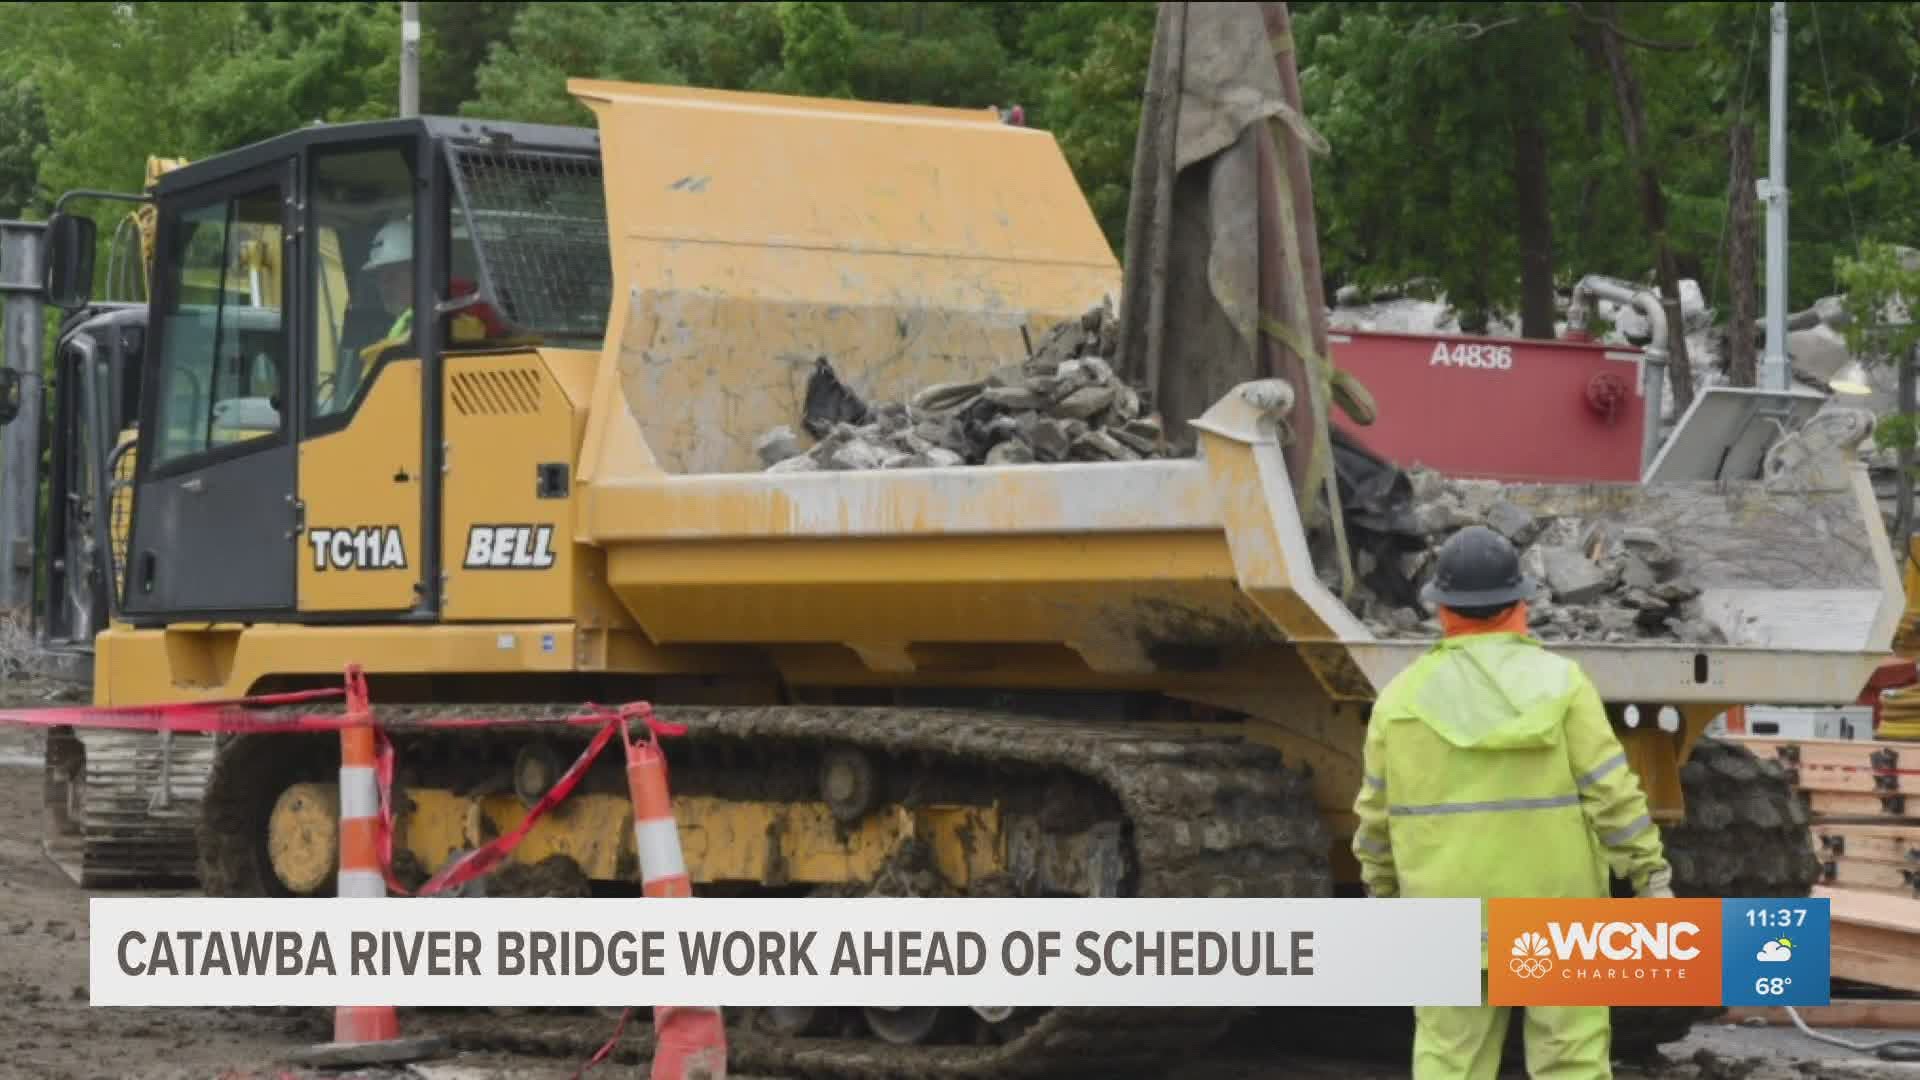 The Catawba River Bridge construction along I-77 in York County, South Carolina, is ahead of schedule to be finished before Memorial Day weekend.